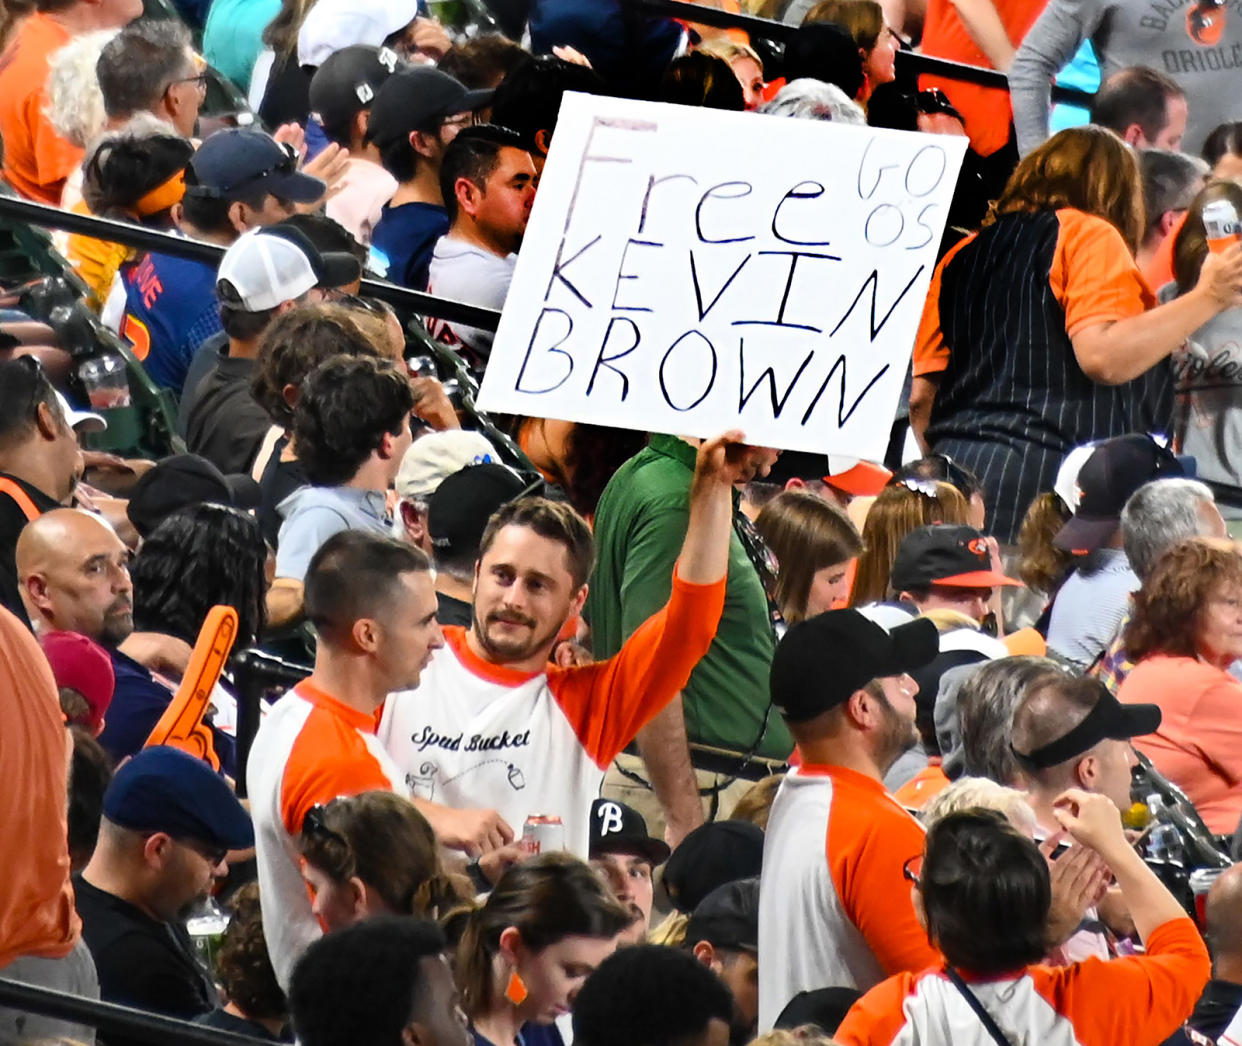 Kevin Brown was suspended by the team after comments he made about the team’s struggles in recent years. (Kevin Richardson/Baltimore Sun/Tribune News Service/Getty Images)